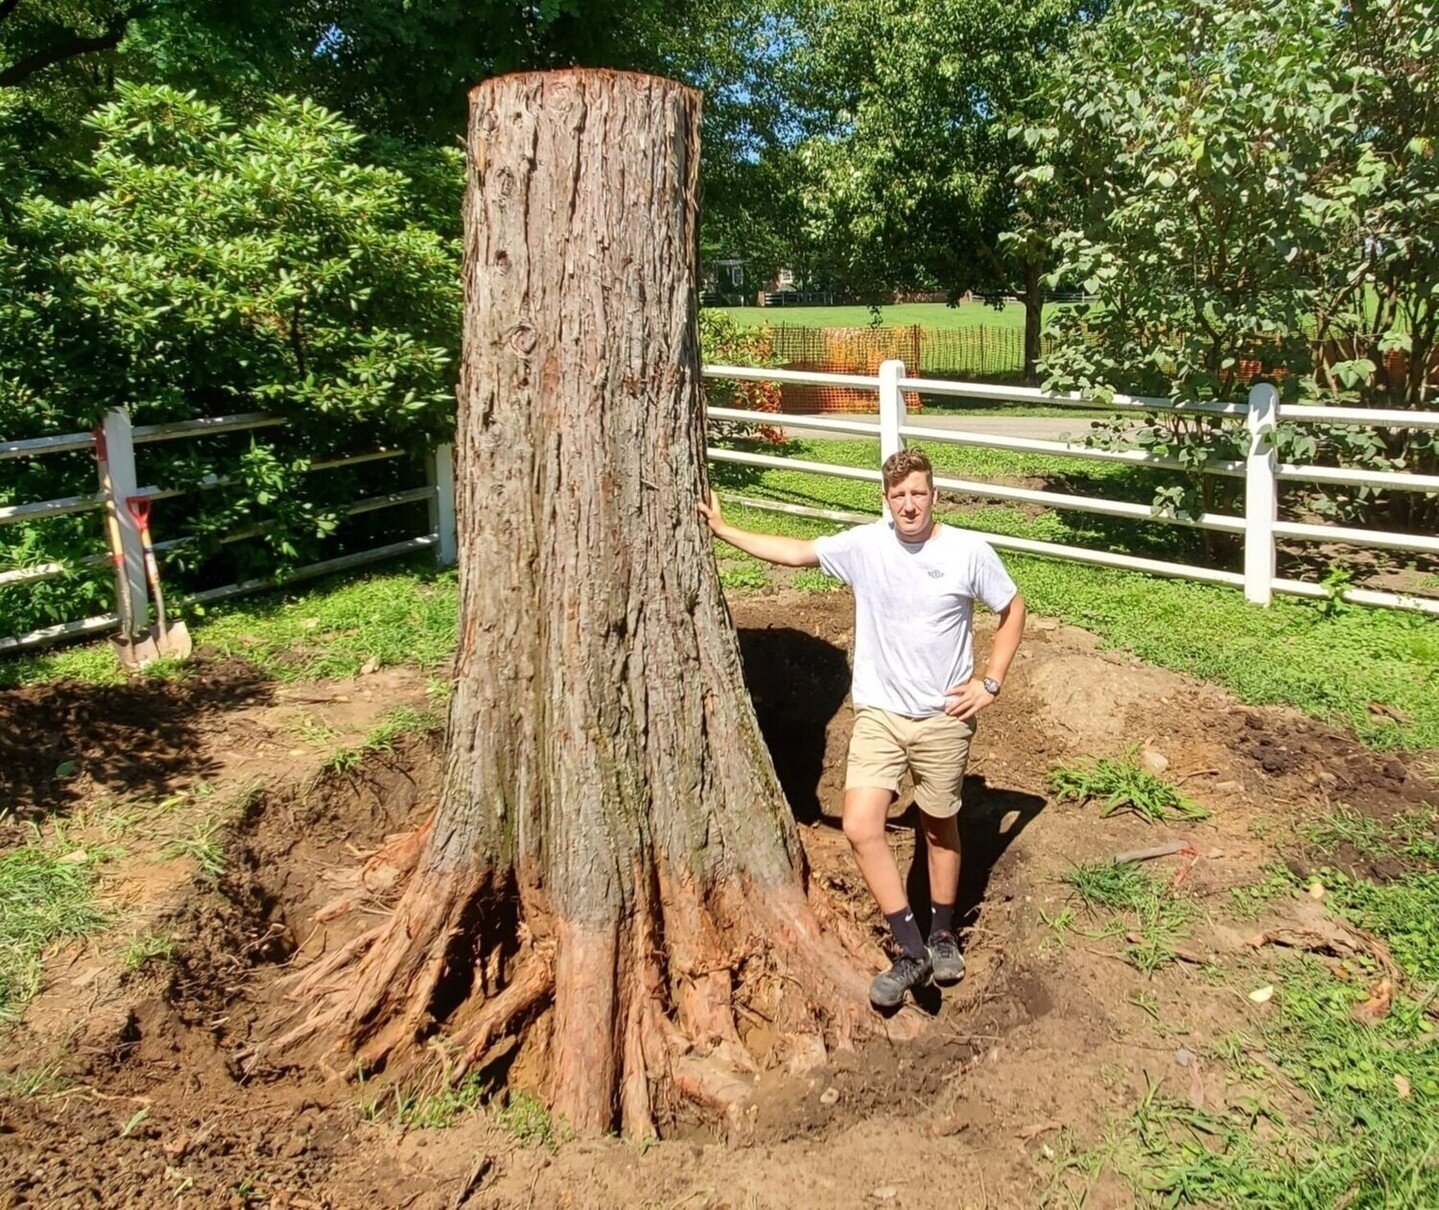 Andre is going back to his roots!⁠
⁠
#urbansalvage #massivetrees #timber #tablescapes #table #slabs #hardwood #reclaimed #diy #localsalvage #lumber #bigtree #woodworking #customfurniture #hardwoodfurniture